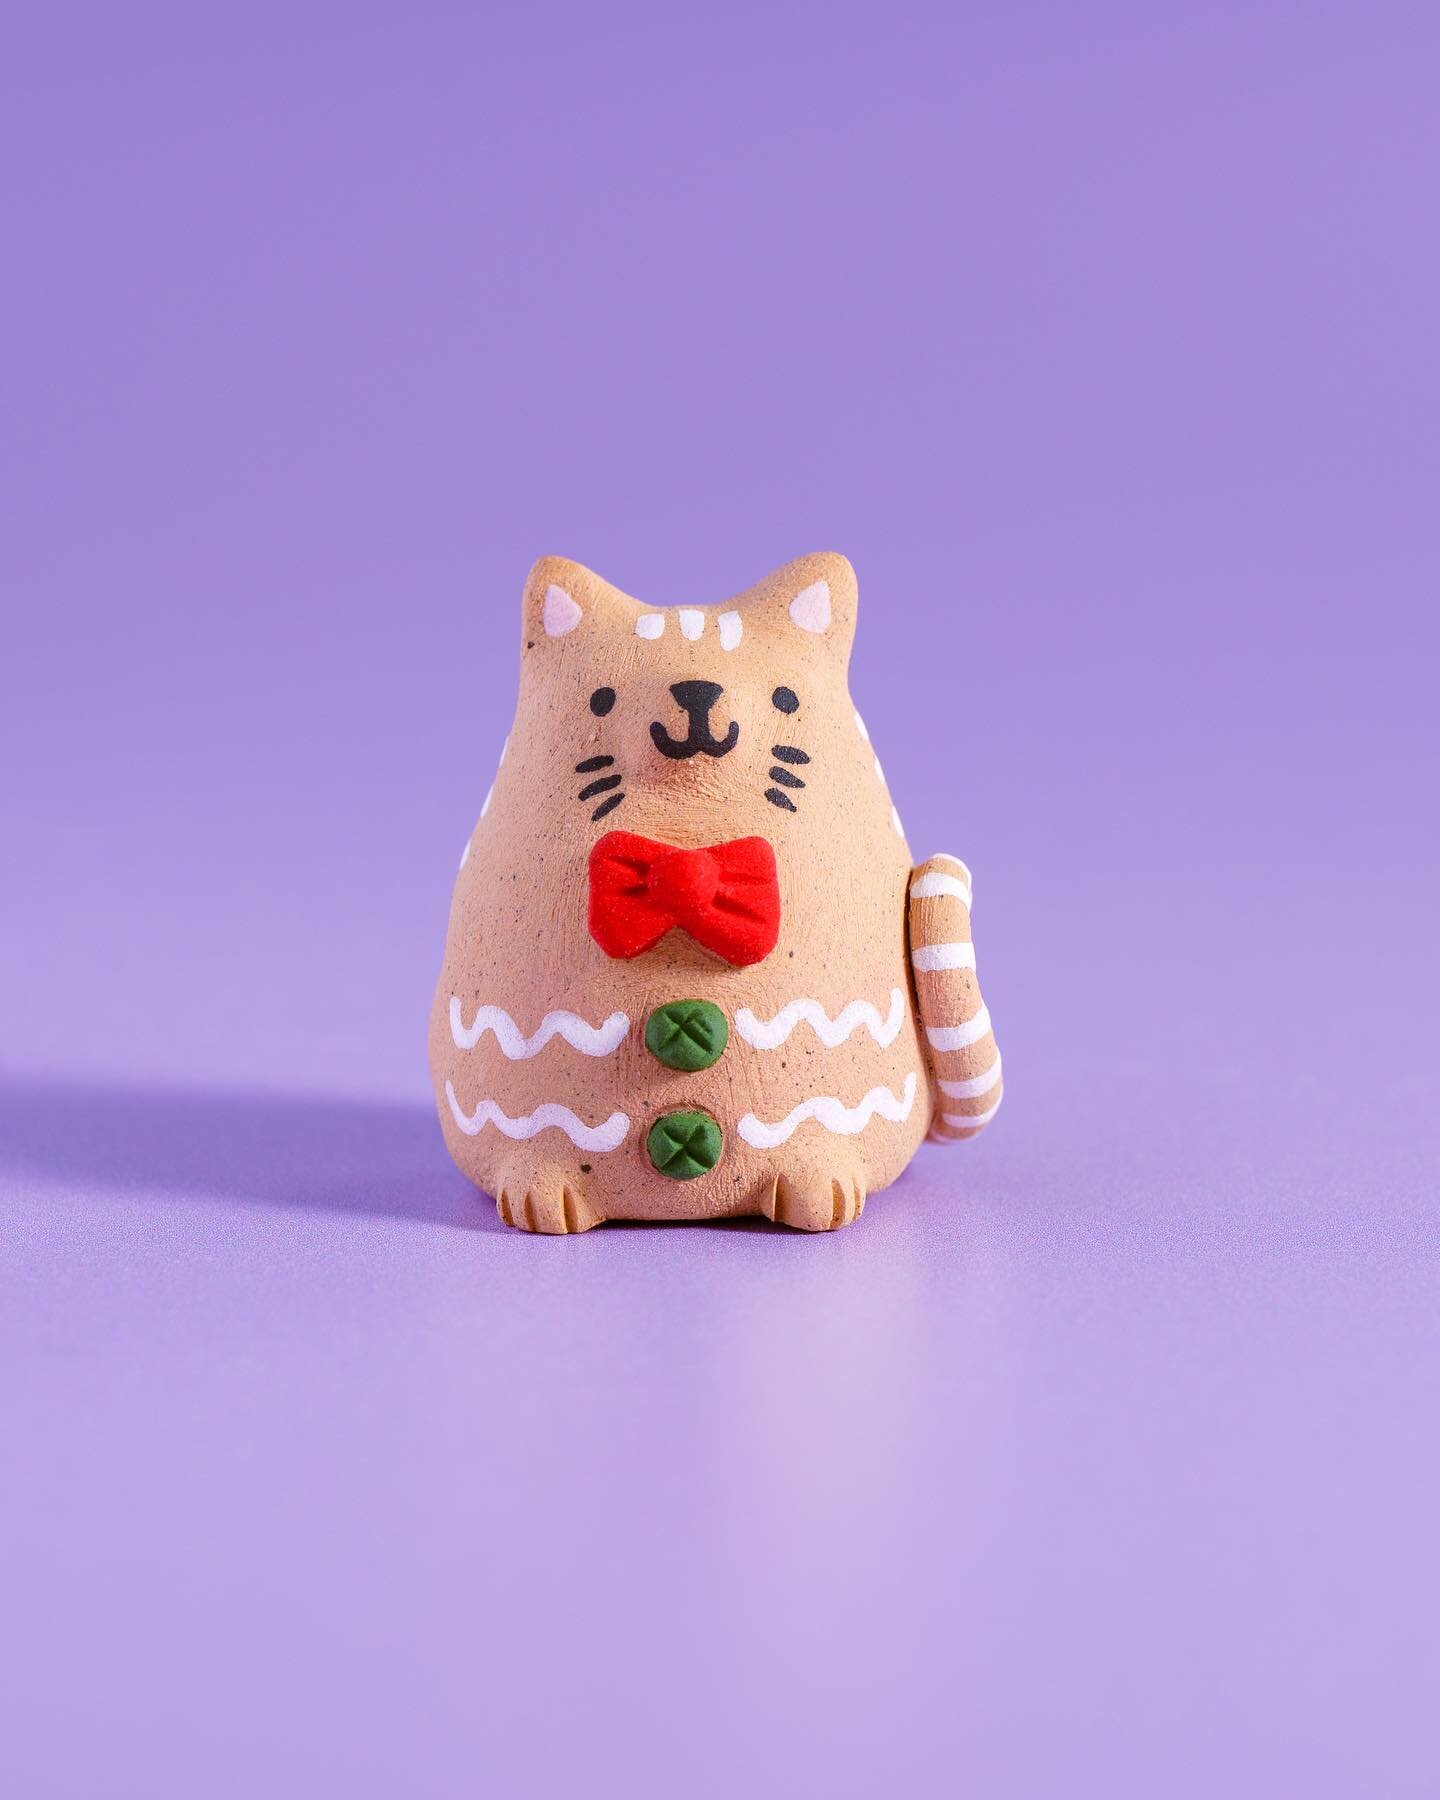 My December collection is now live! 🥳

Including the sweetest little kitty you will find this festive season, Gingerspice the gingerbread cat! Featuring a fetching bow tie and white icing fur markings 🐱

Head over to my website shop if you want to 